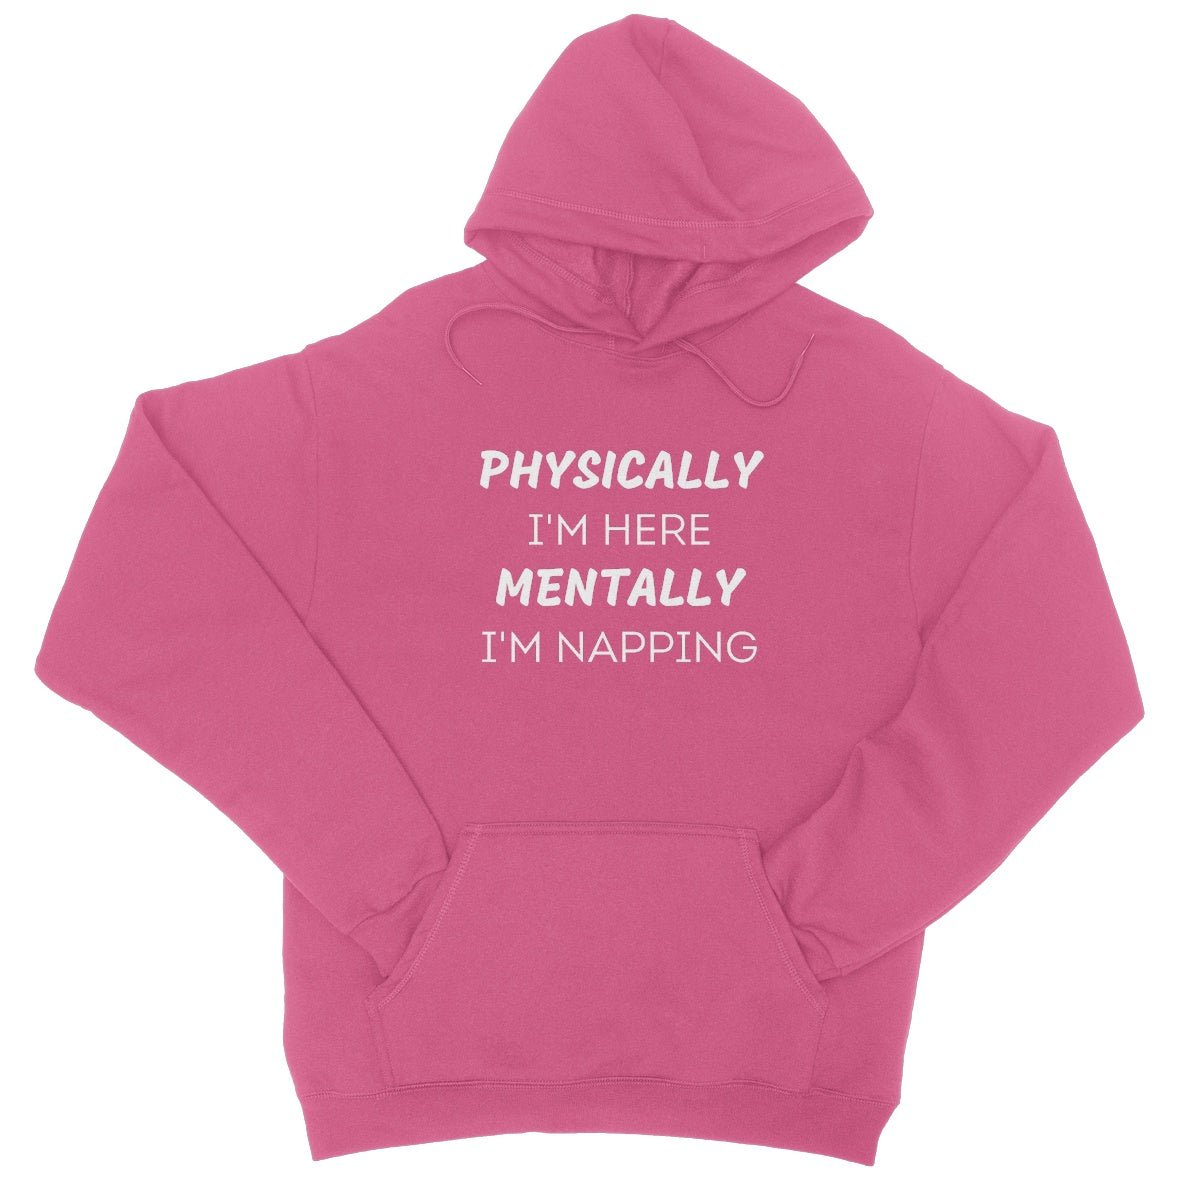 physically here mentally napping hoodie pink